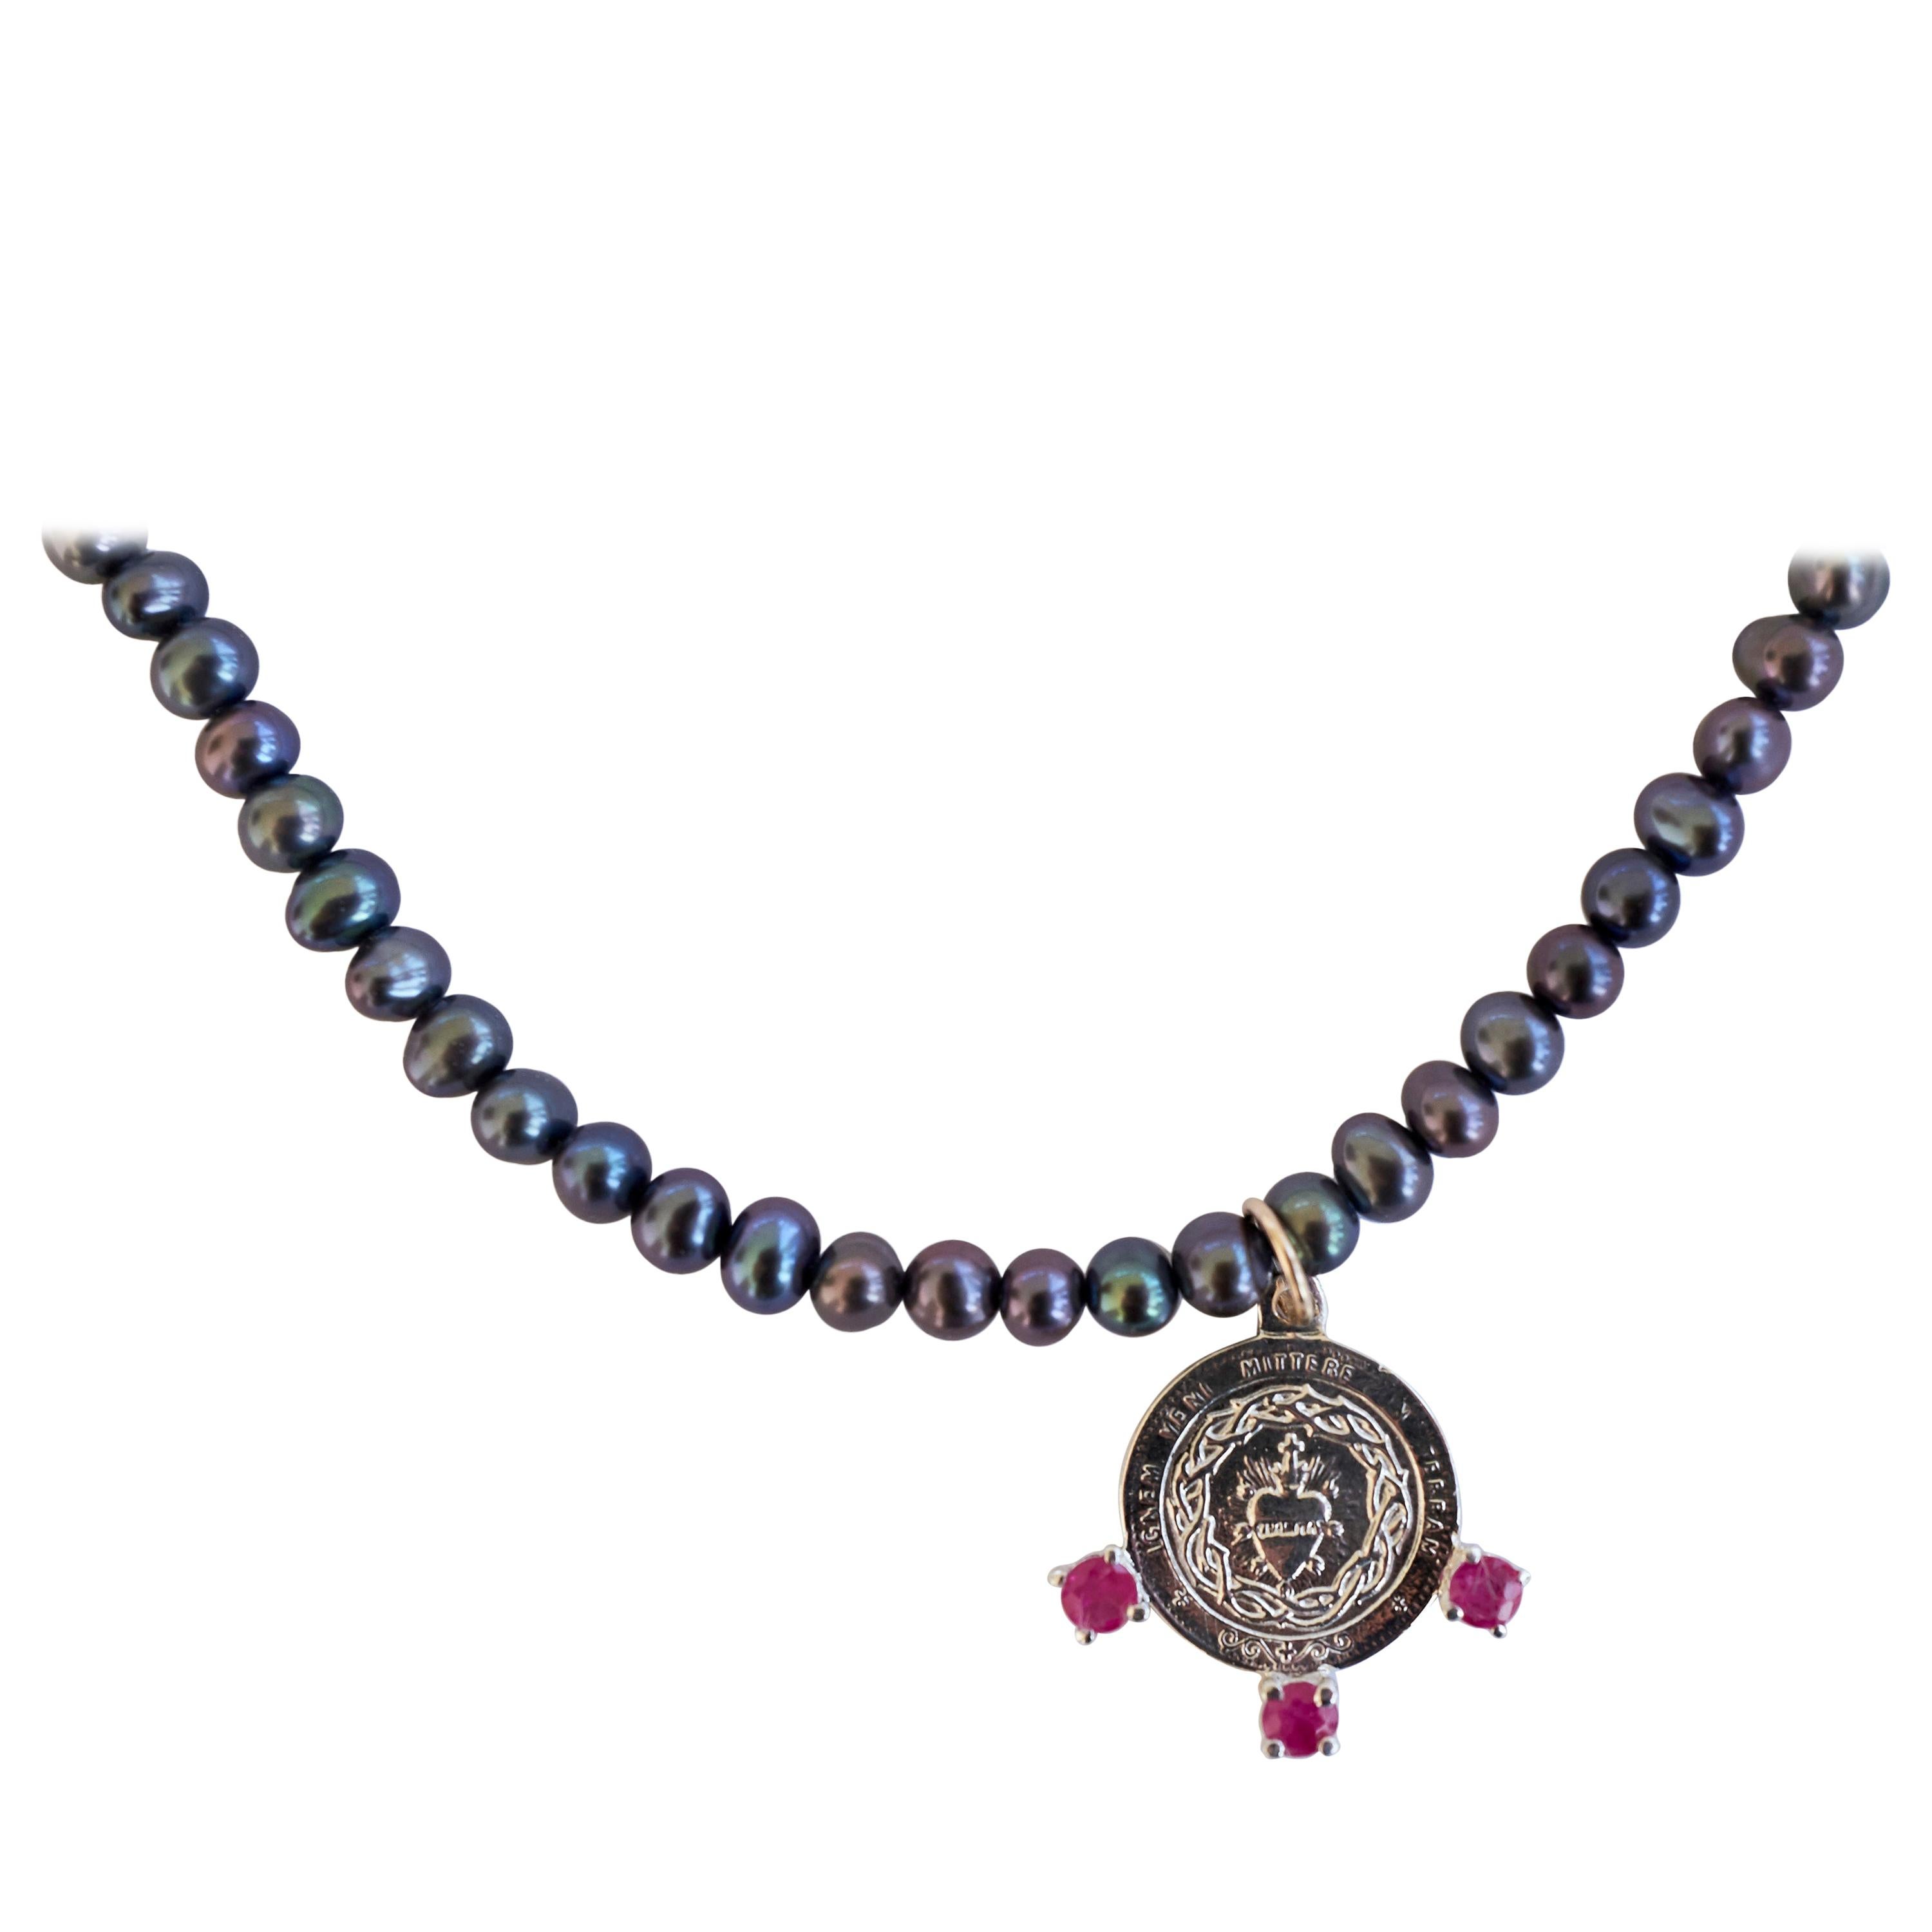 Black Pearl Sacred Heart Medal Pink Tourmaline Silver Chain Necklace J Dauphin

The Sacred Heart (also known as the Sacred Heart of Jesus) has one of the deepest meanings in the Roman Catholic practice. The symbol represents Jesus Christ’s actual